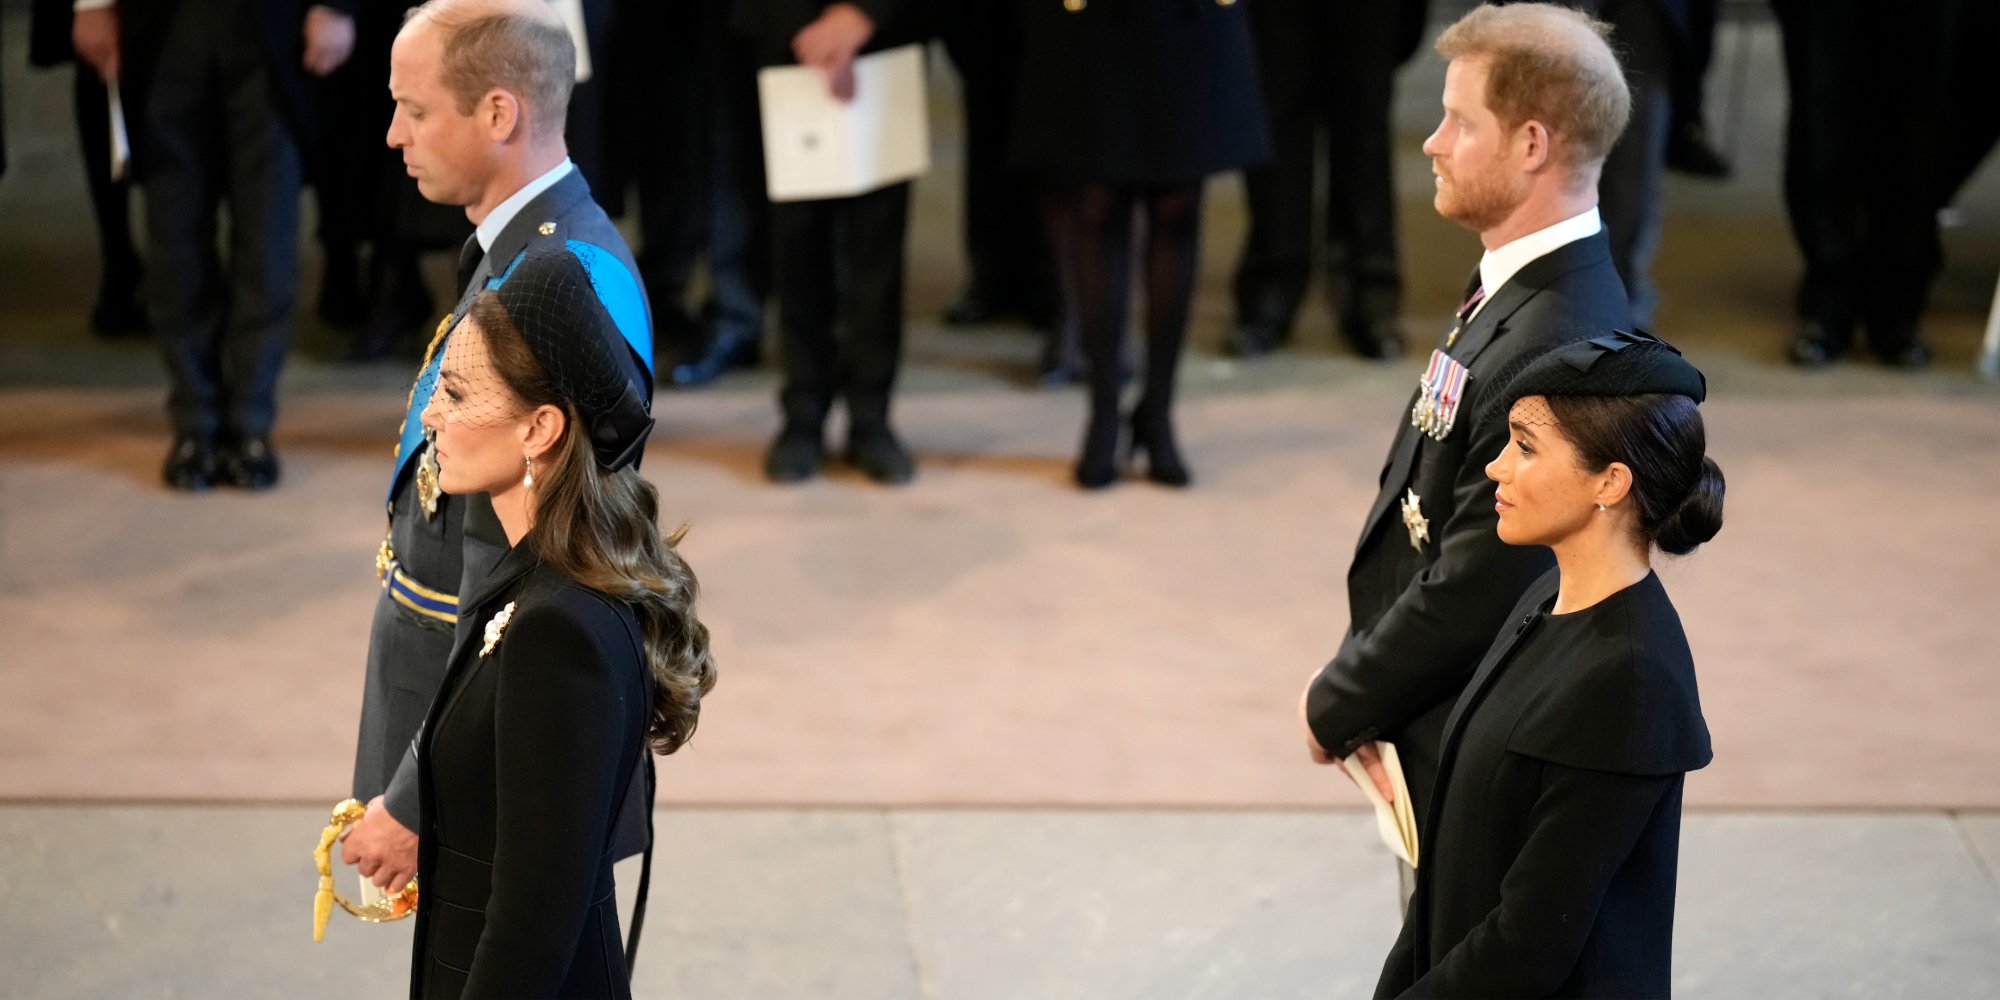 Prince William, Kate Middleton, Prince Harry and Meghan Markle photographed at Westminster Hall at Queen Elizabeth's lying in state service on Sept. 14, 2022.